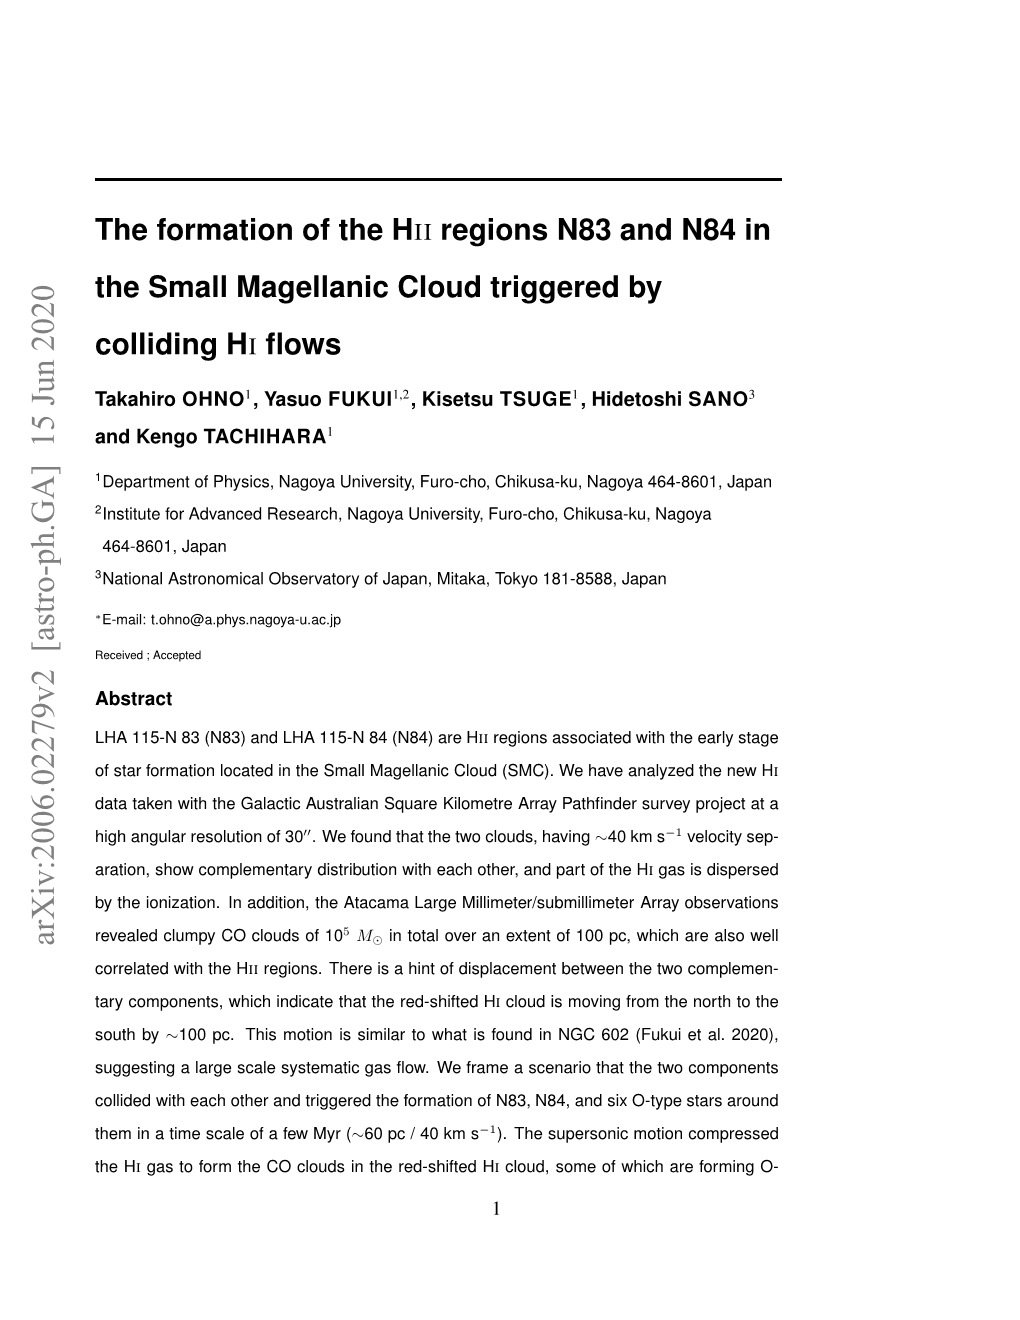 The Formation of the HII Regions N83 and N84 in the Small Magellanic